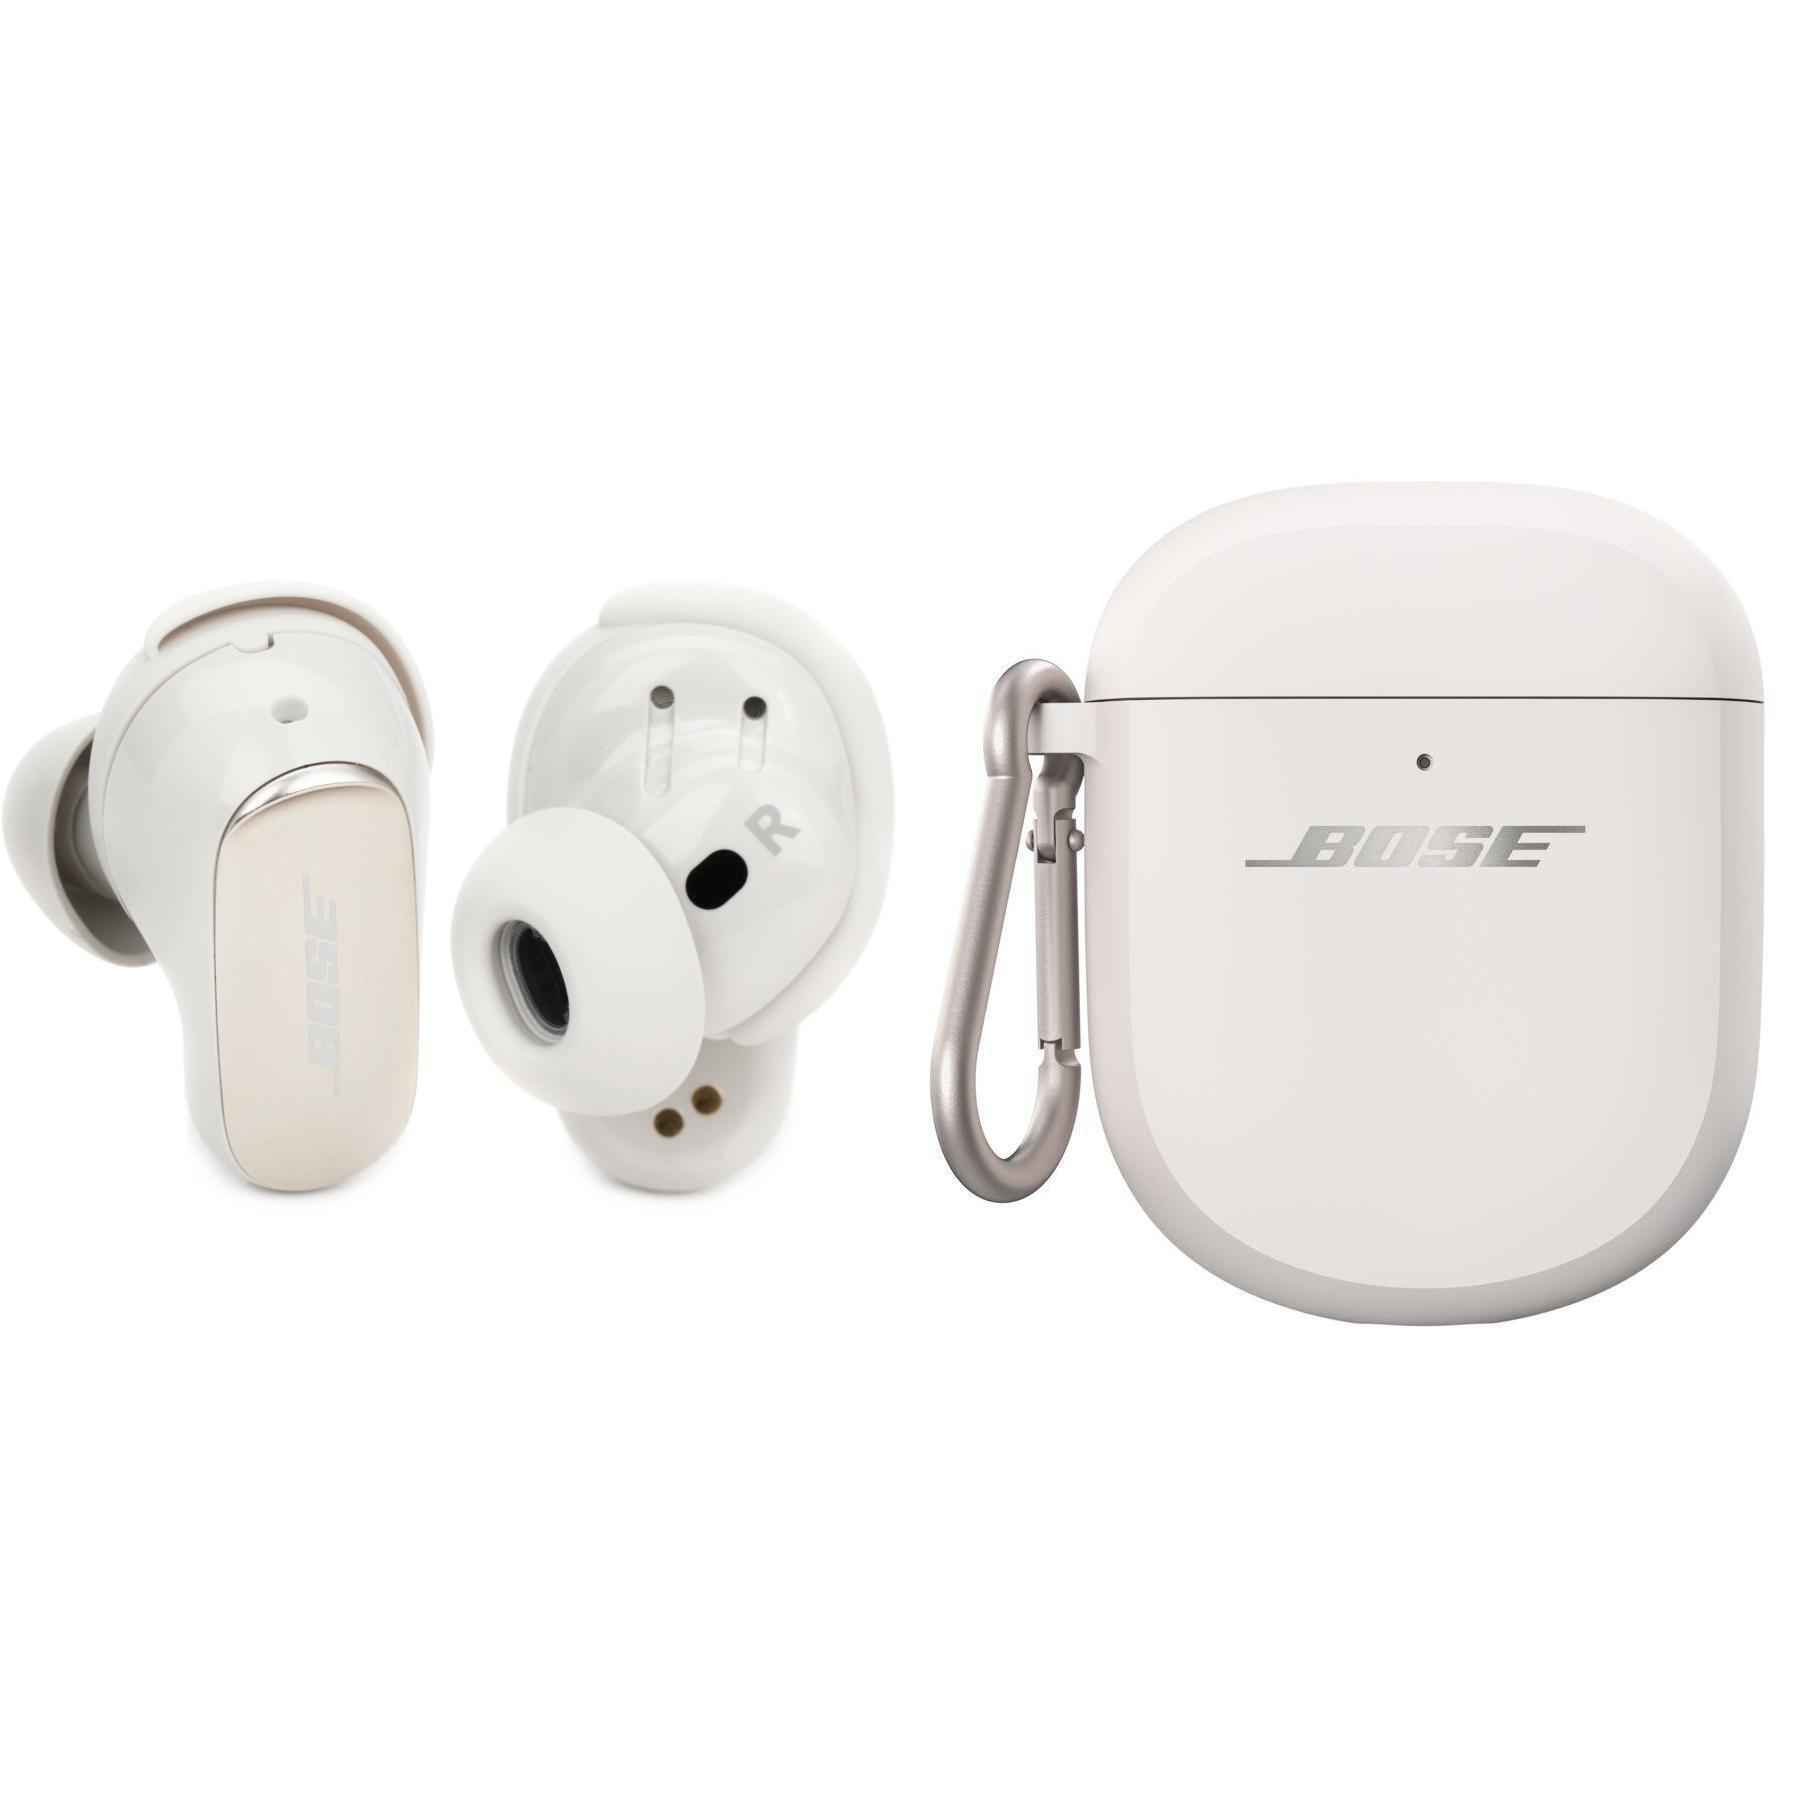 Bose QuietComfort Ultra Earbuds with Wireless Charging Case - White